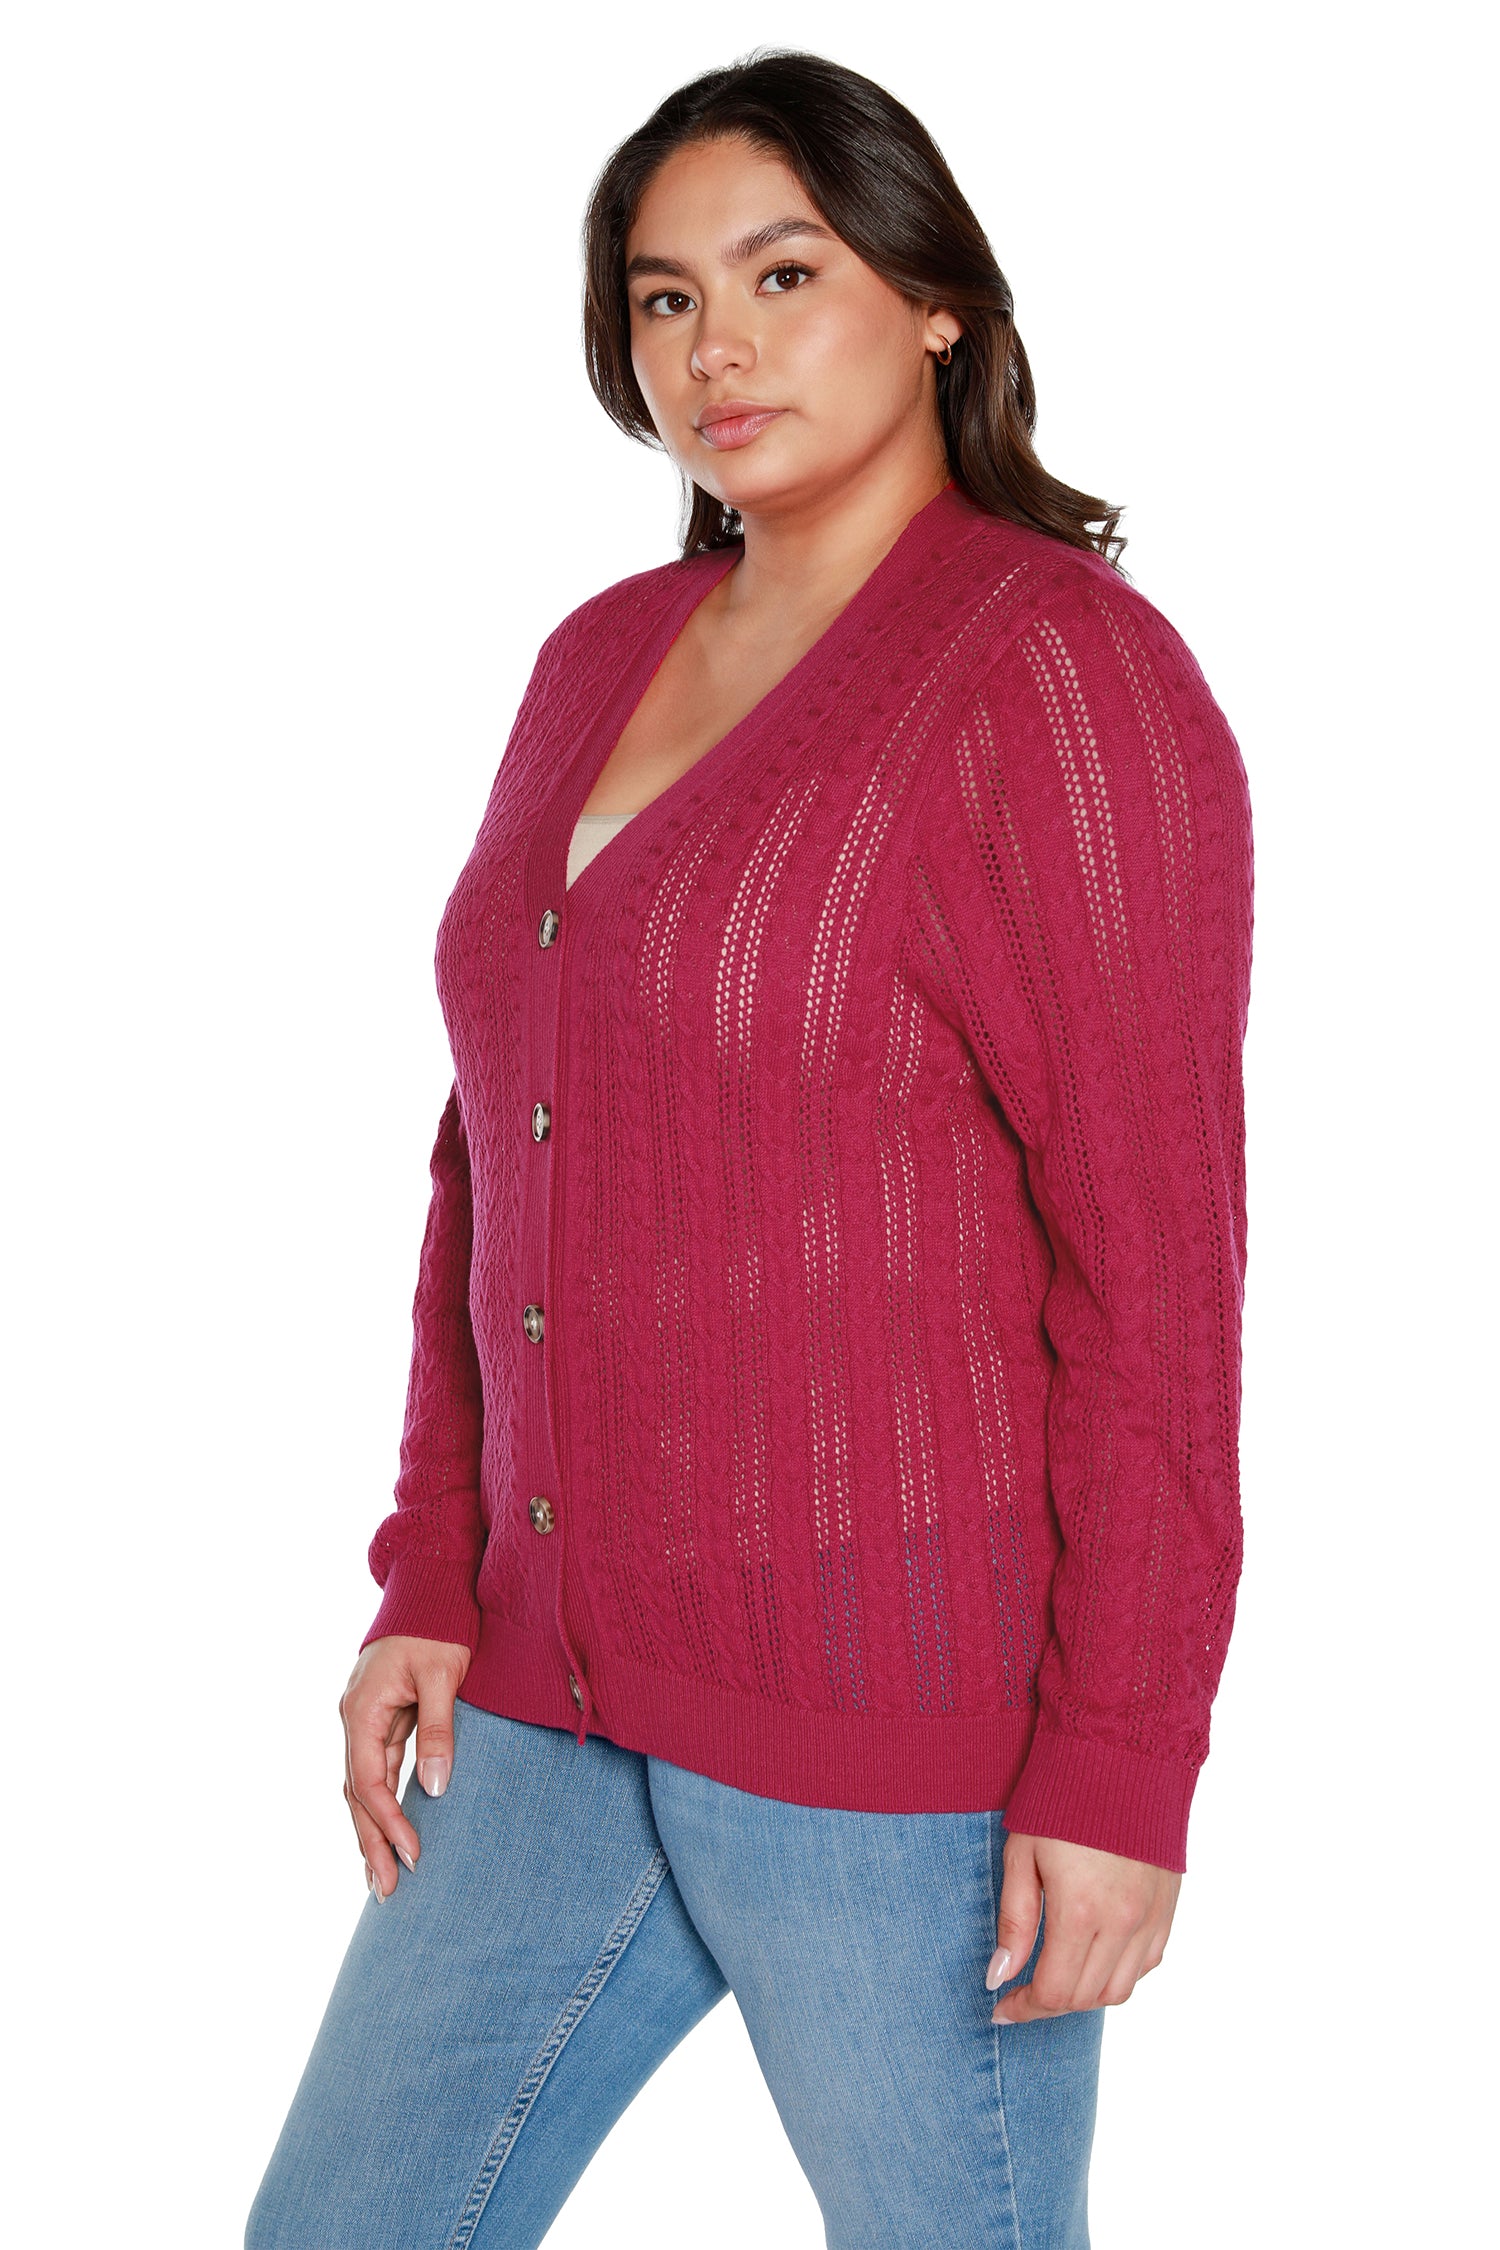 Women’s Lightweight Semi Sheer Cable Knit Button Front Cardigan | Curvy